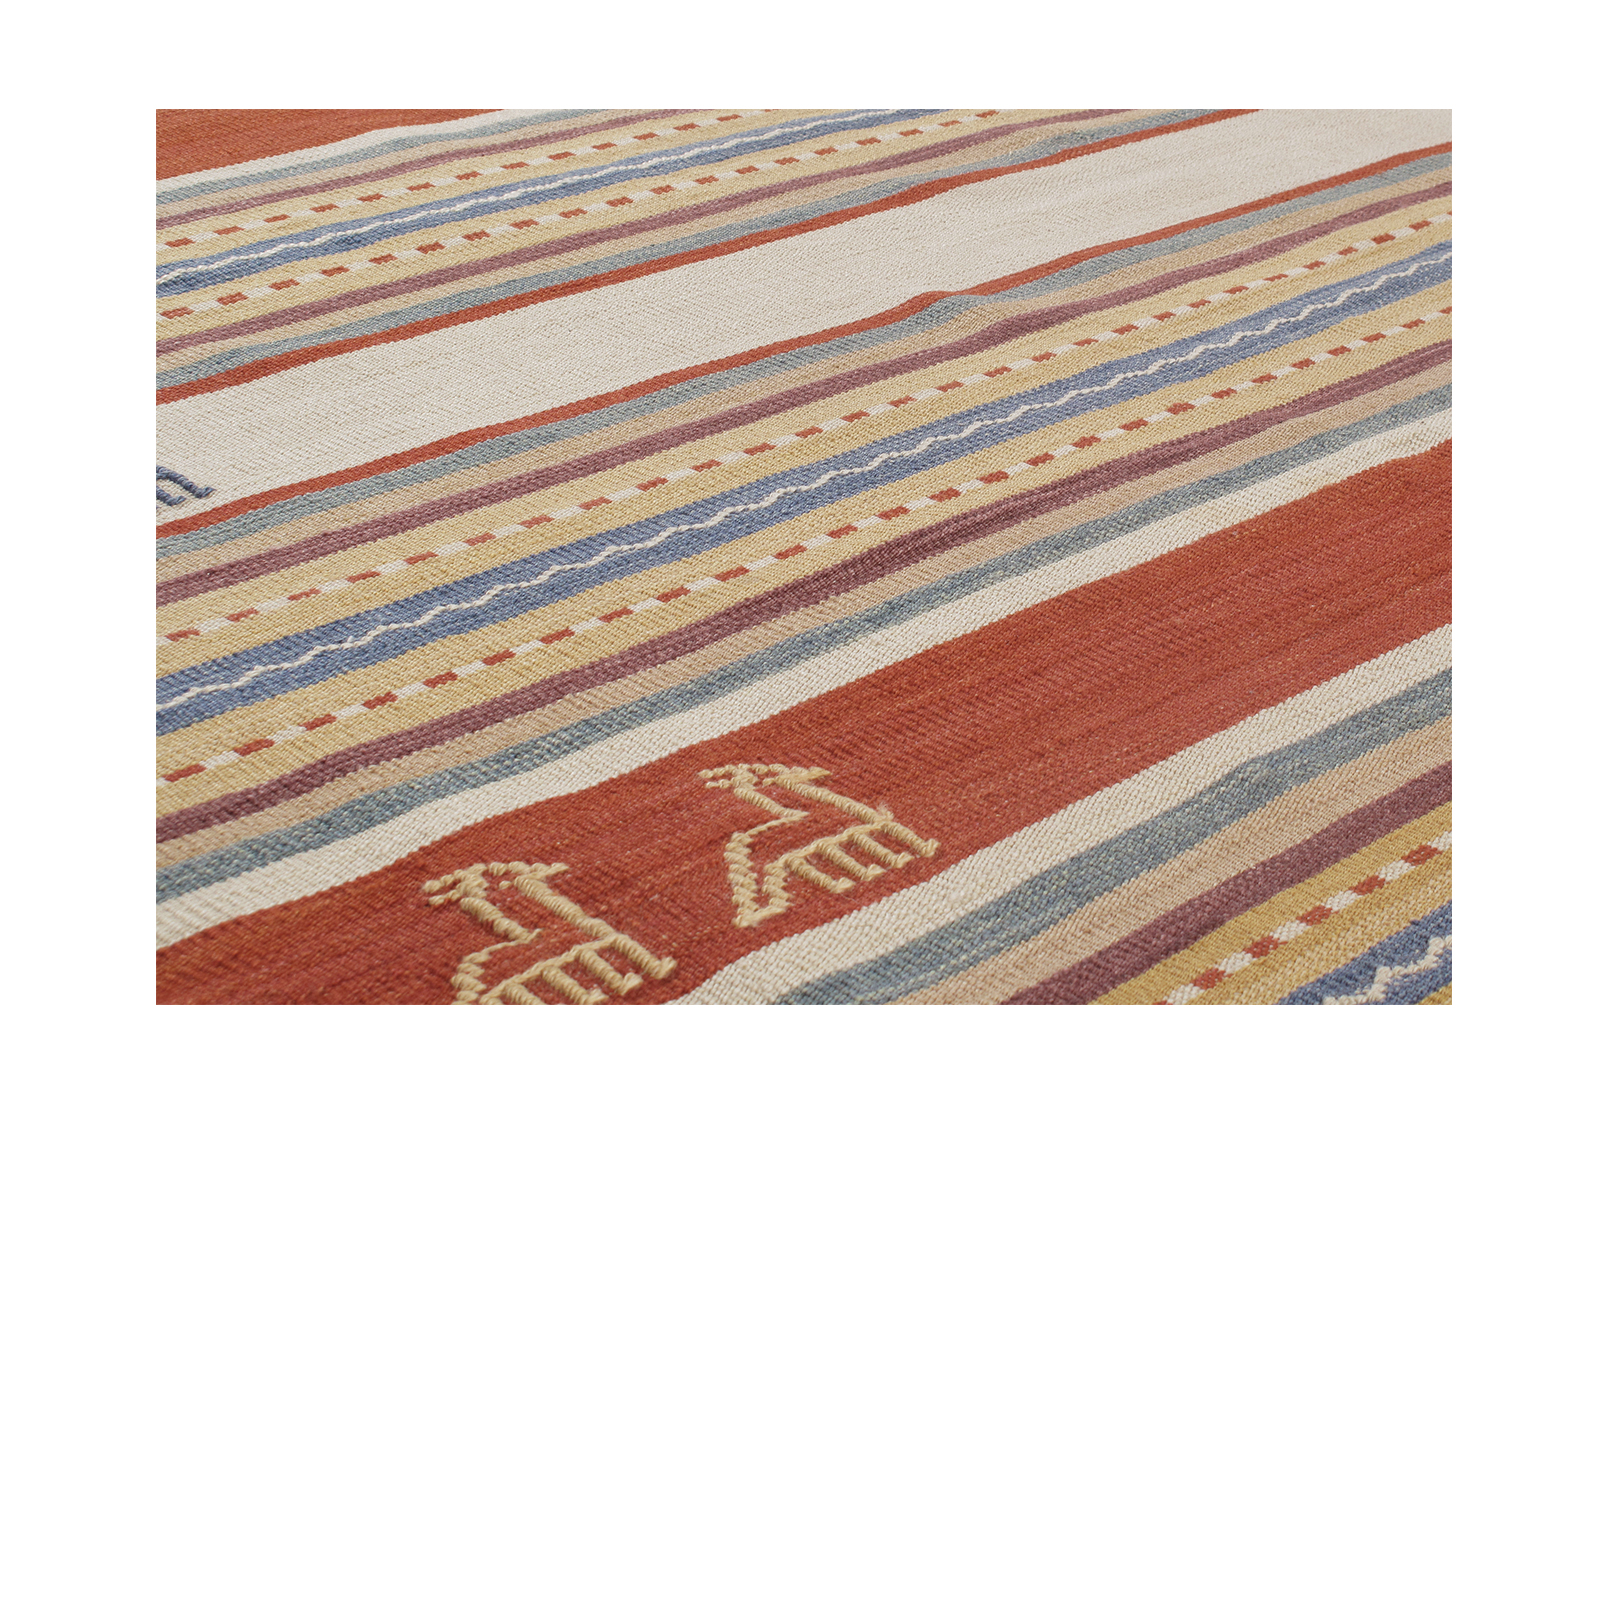 Shiraz Kilim is hand woven and made form 100% wool.